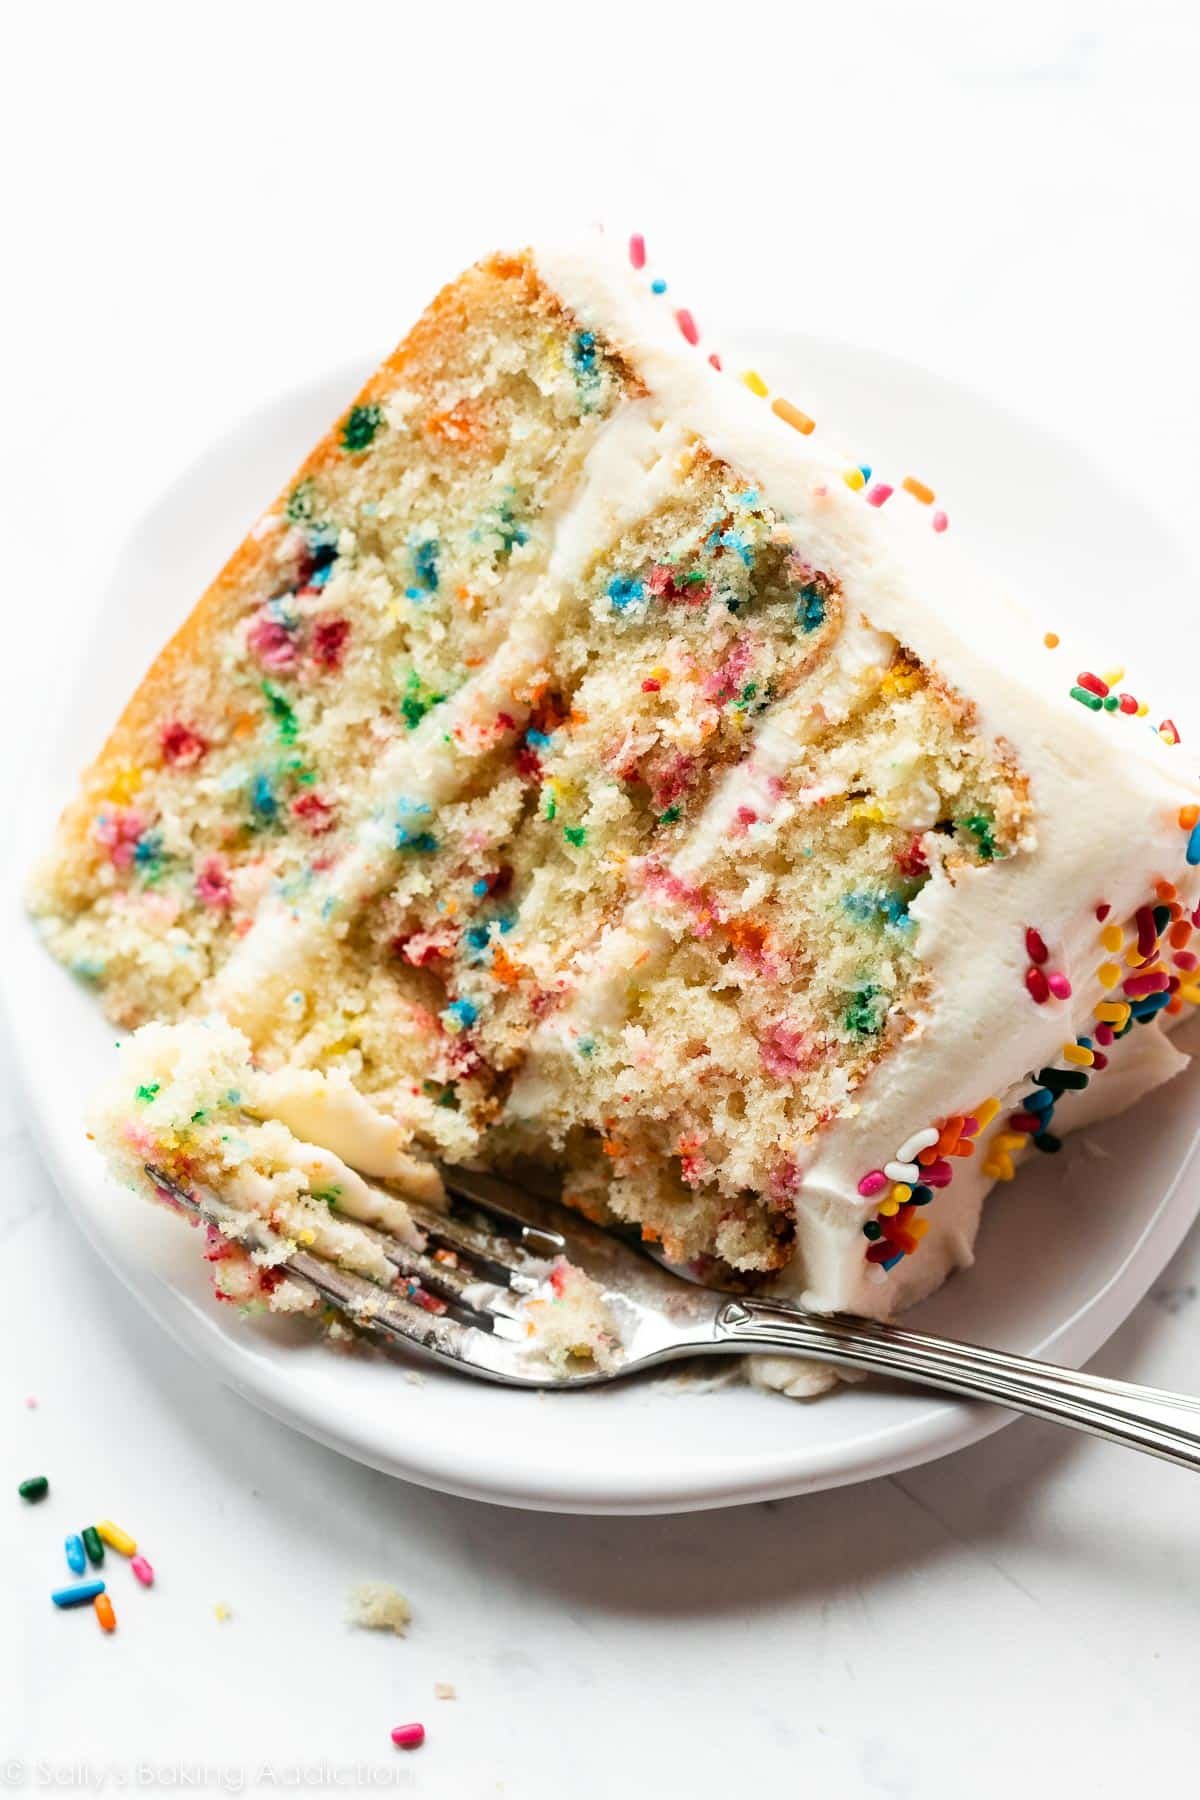 slice of Funfetti confetti birthday cake with vanilla buttercream and extra rainbow sprinkles on white plate.